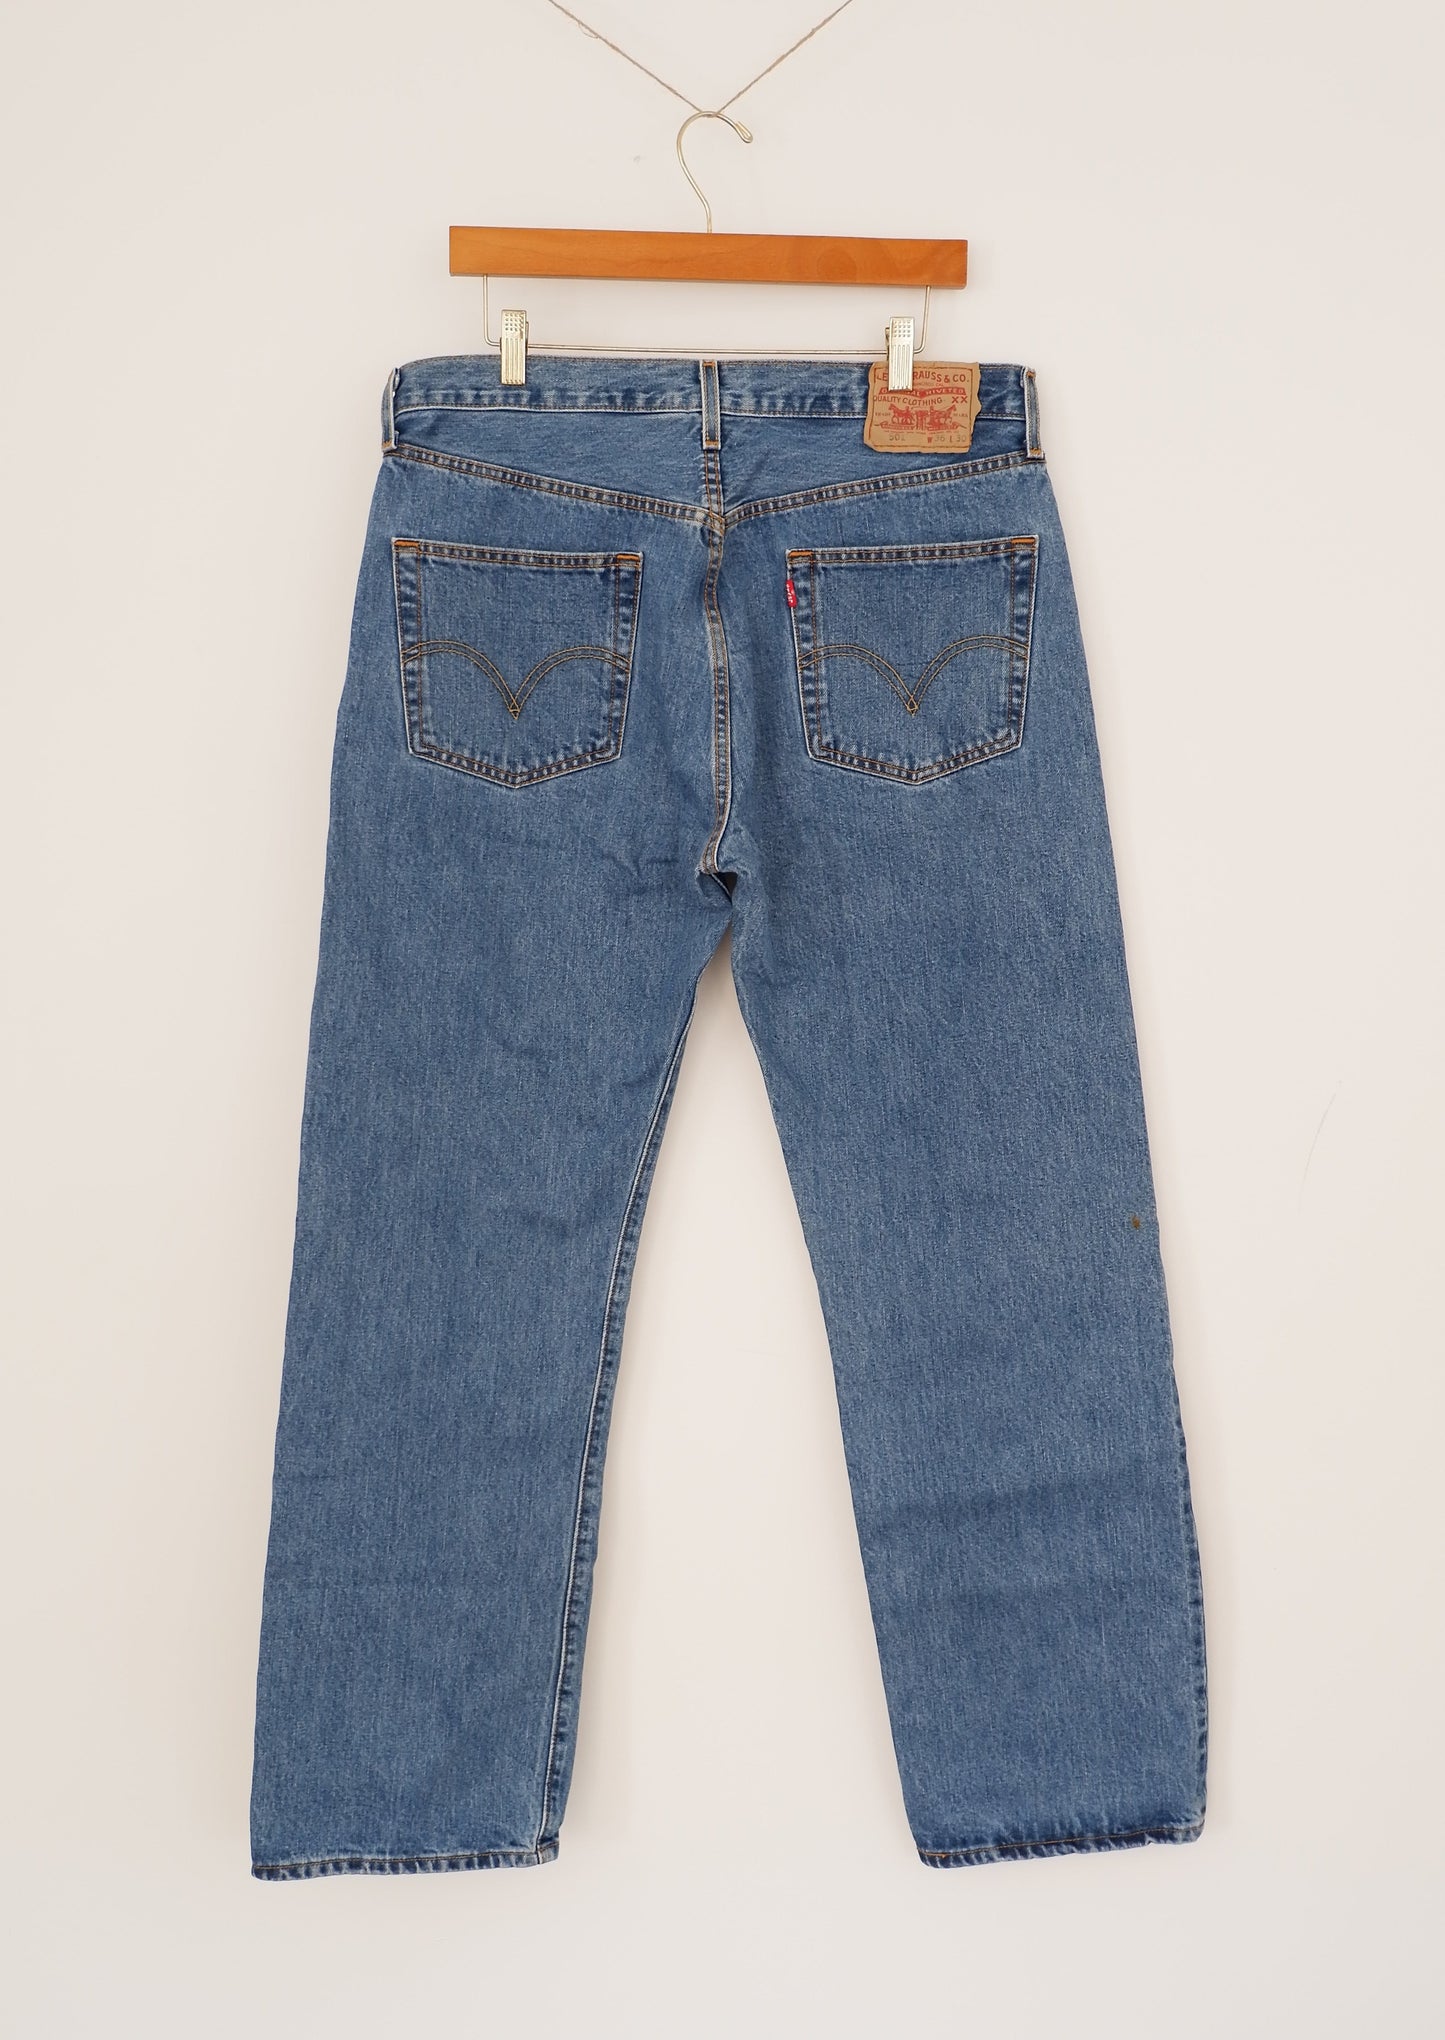 Levis 501 Medium Wash Relaxed Fit Straight Leg Jeans - 34